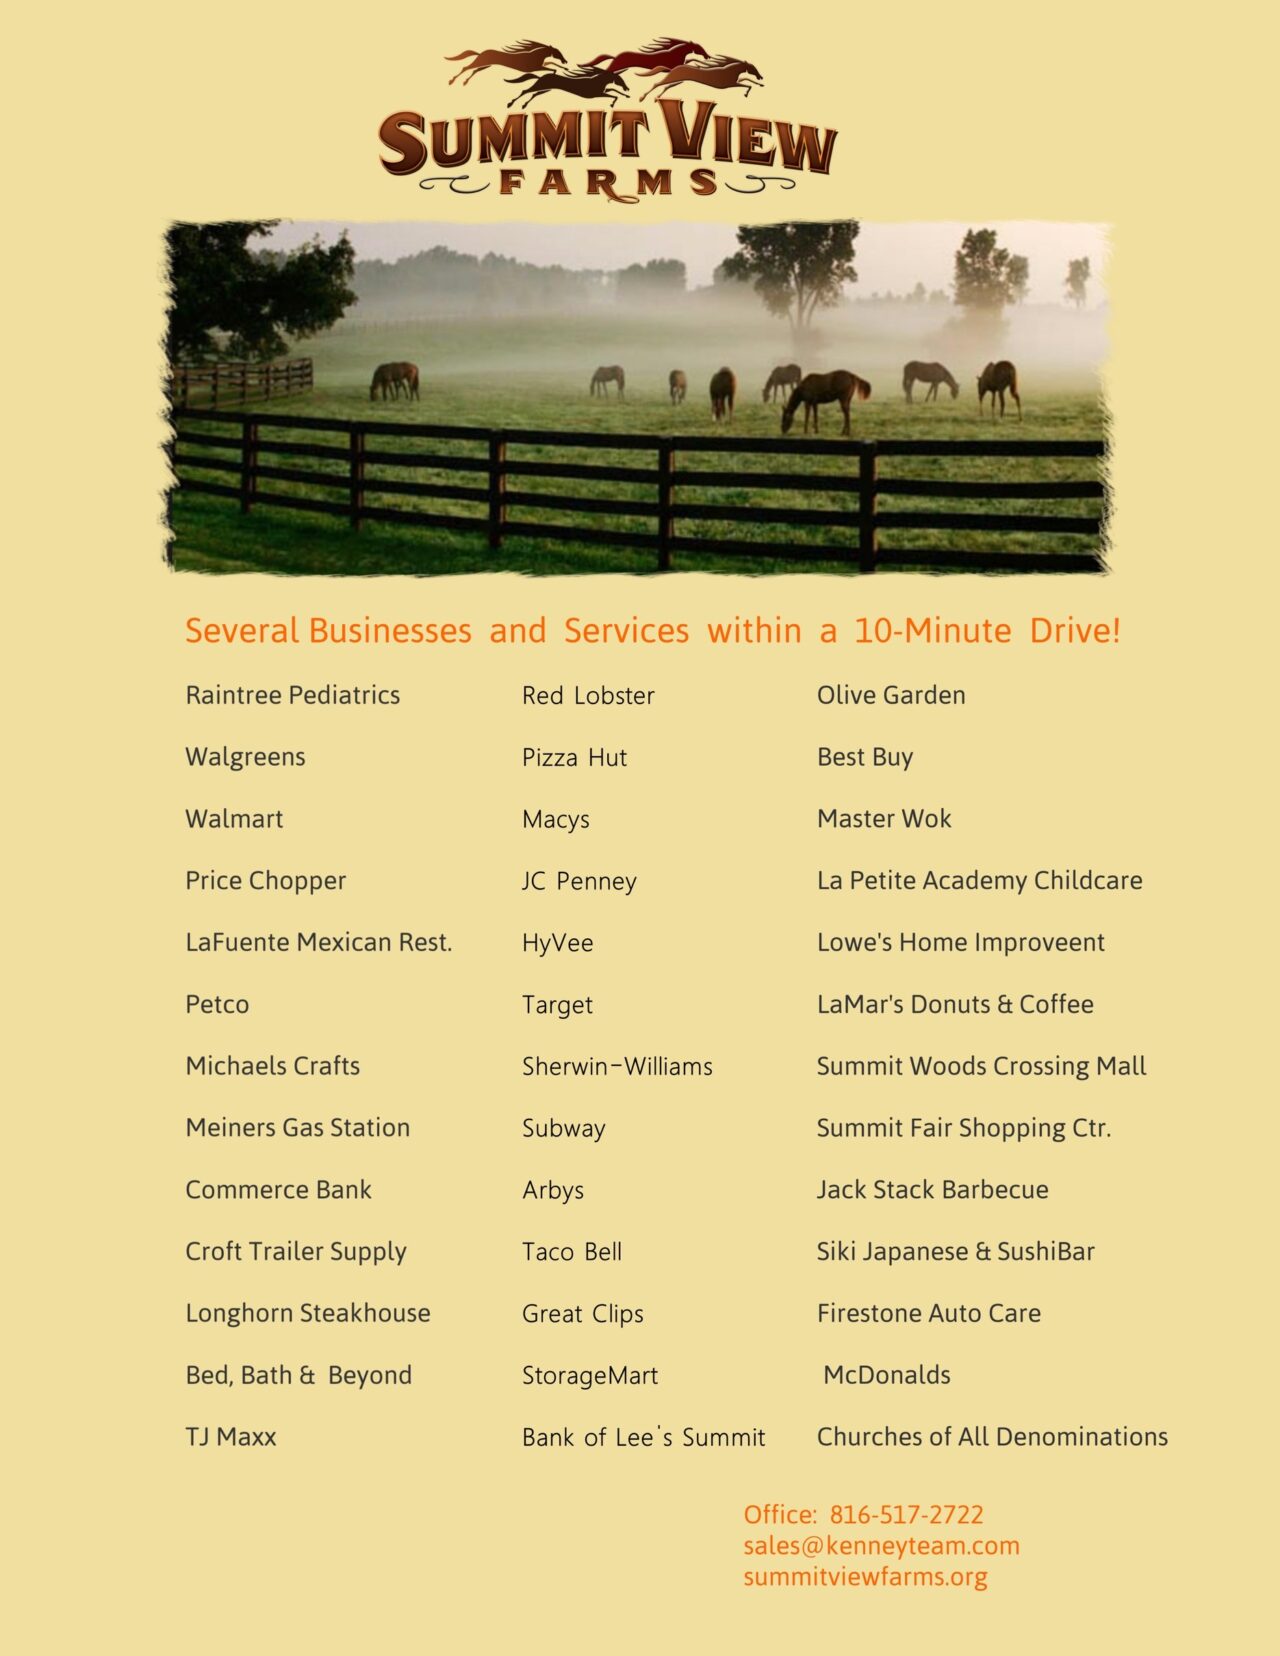 A flyer for the summit view equestrian center.